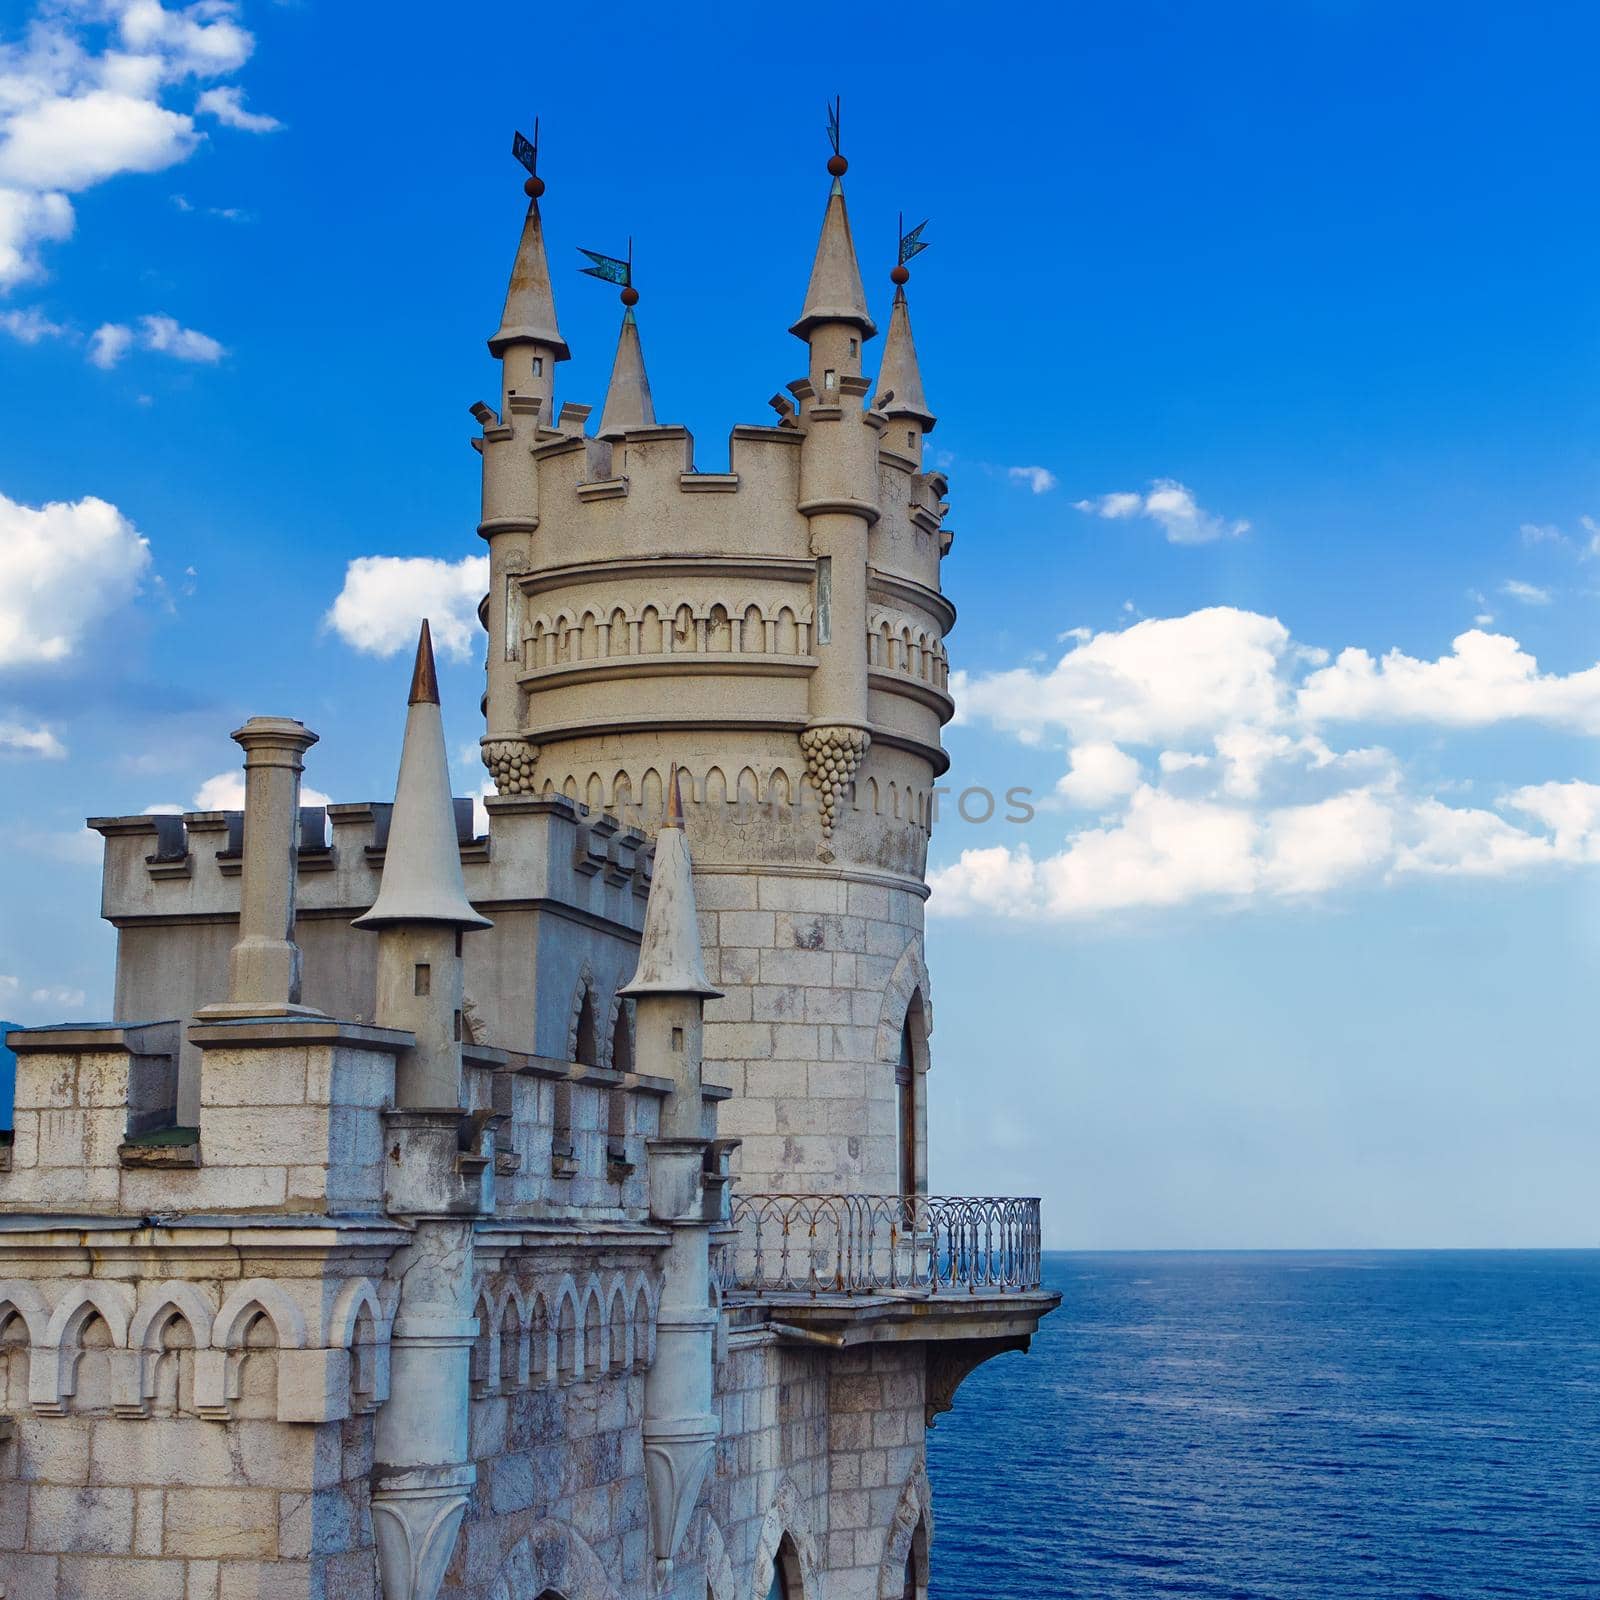 Medieval castle agains blue sky with clouds and Black sea. Swall by dmitryz